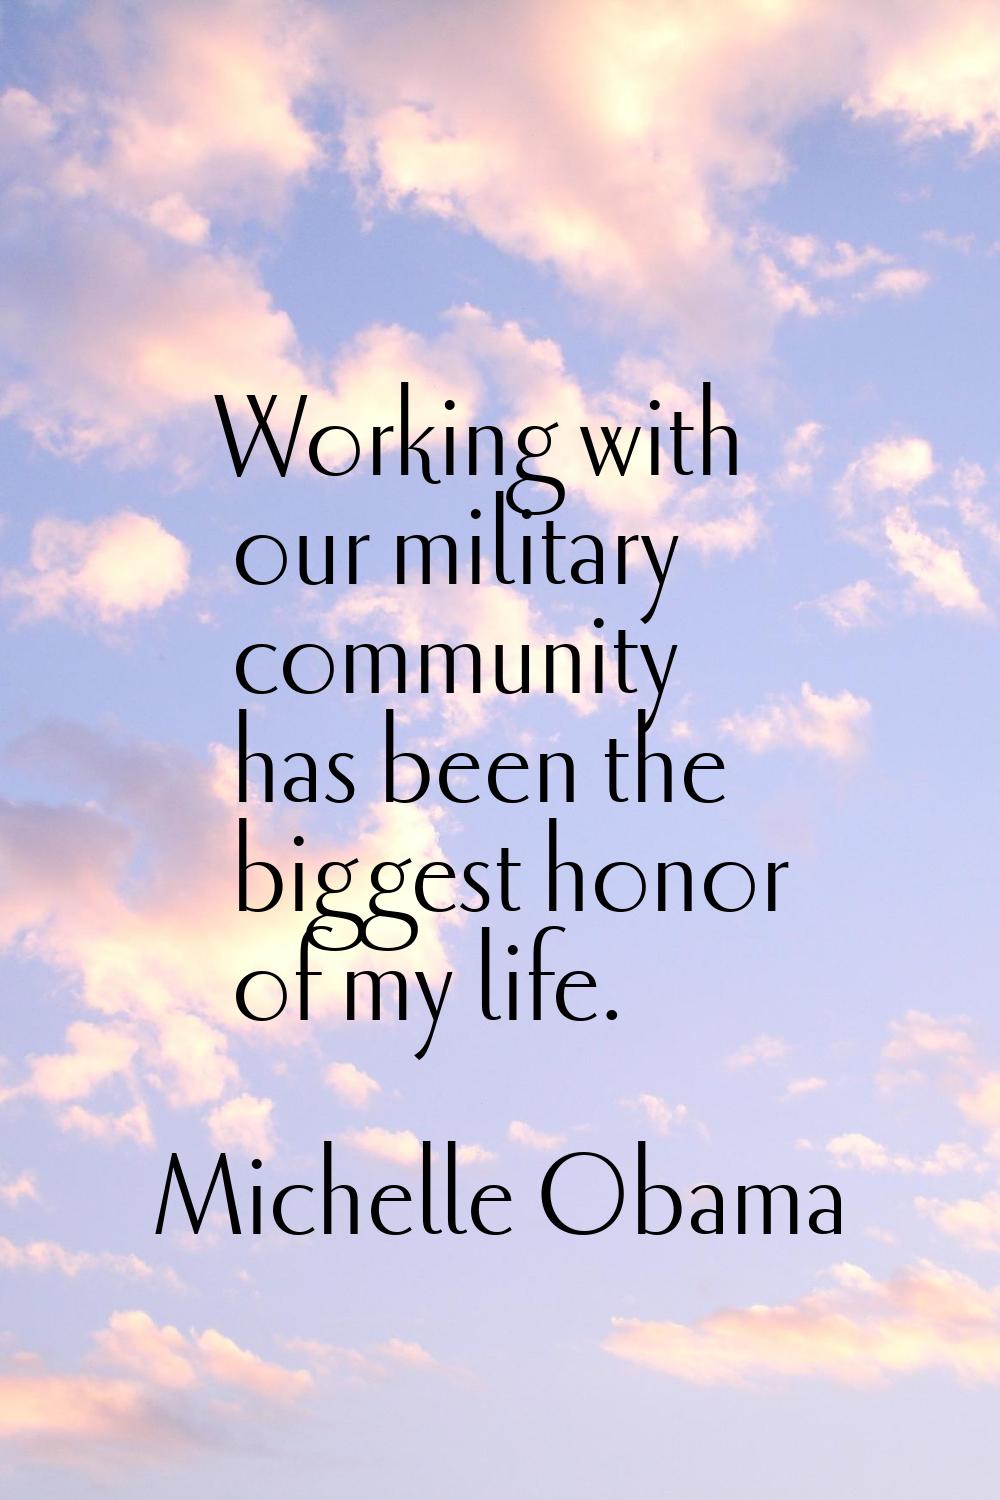 Working with our military community has been the biggest honor of my life.